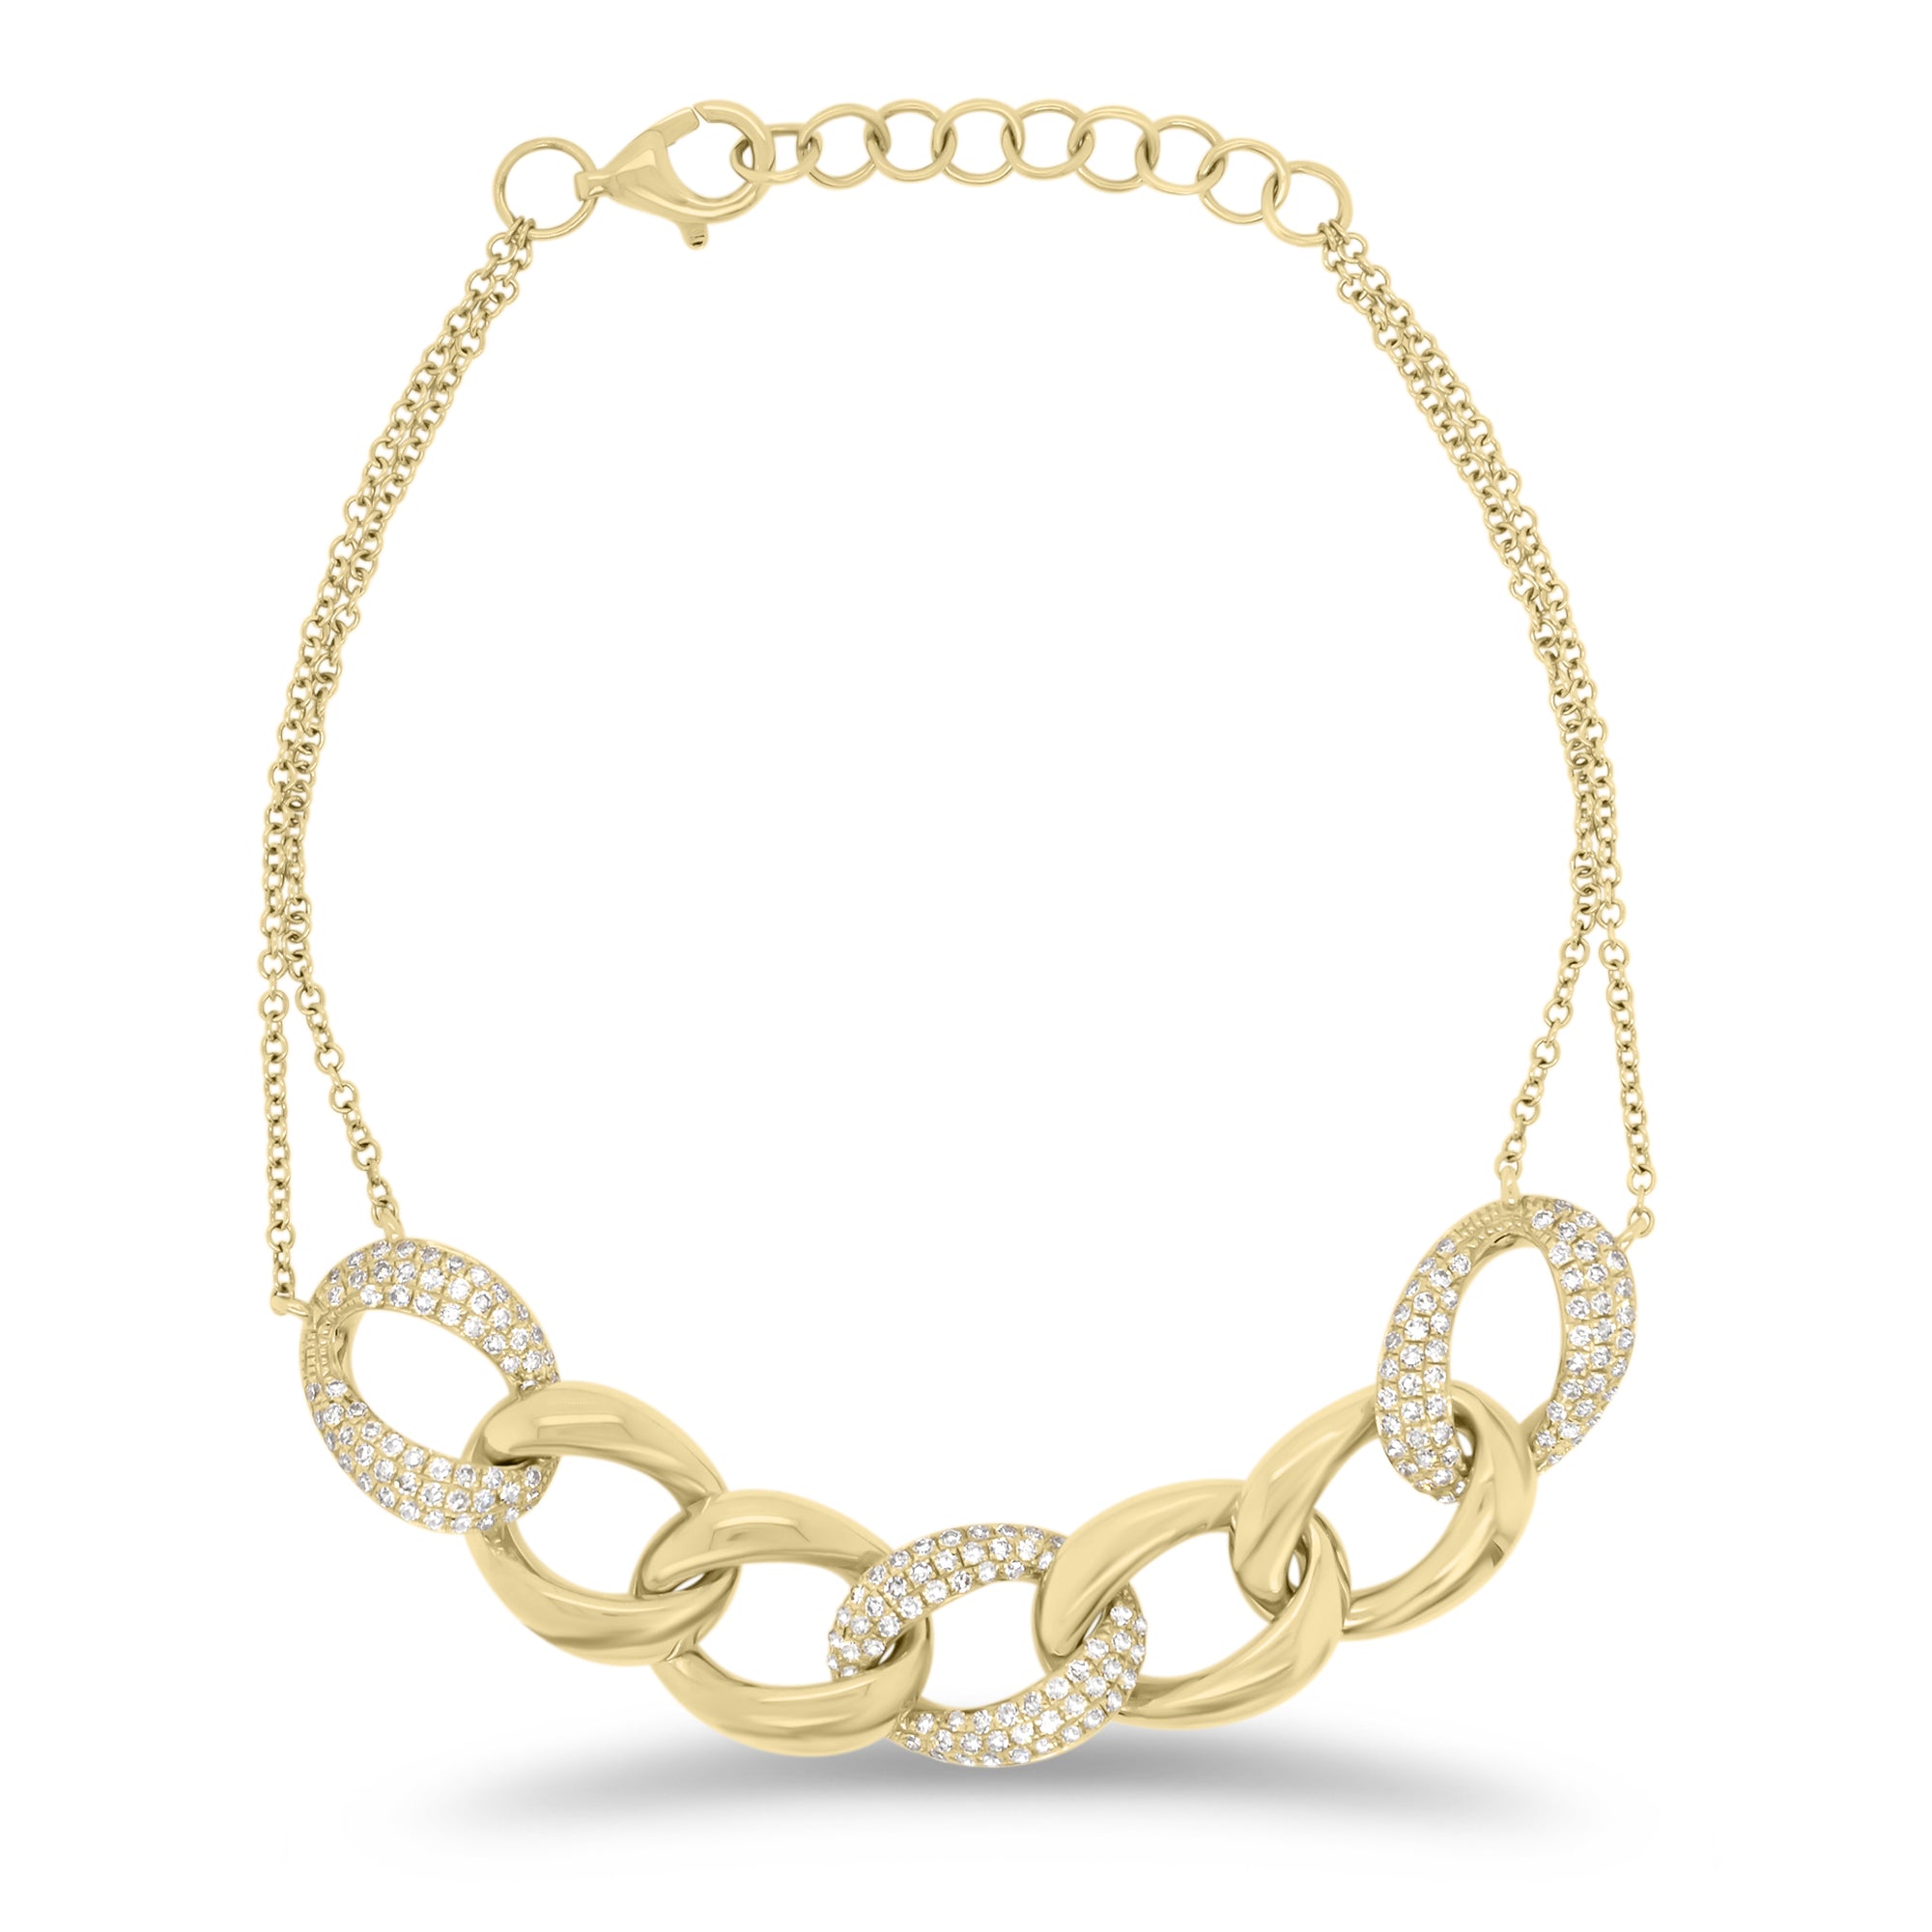 Diamond Link Double Cable Chain Bracelet - 14K yellow gold weighing 6.50 grams - 180 round diamonds totaling 0.57 carats